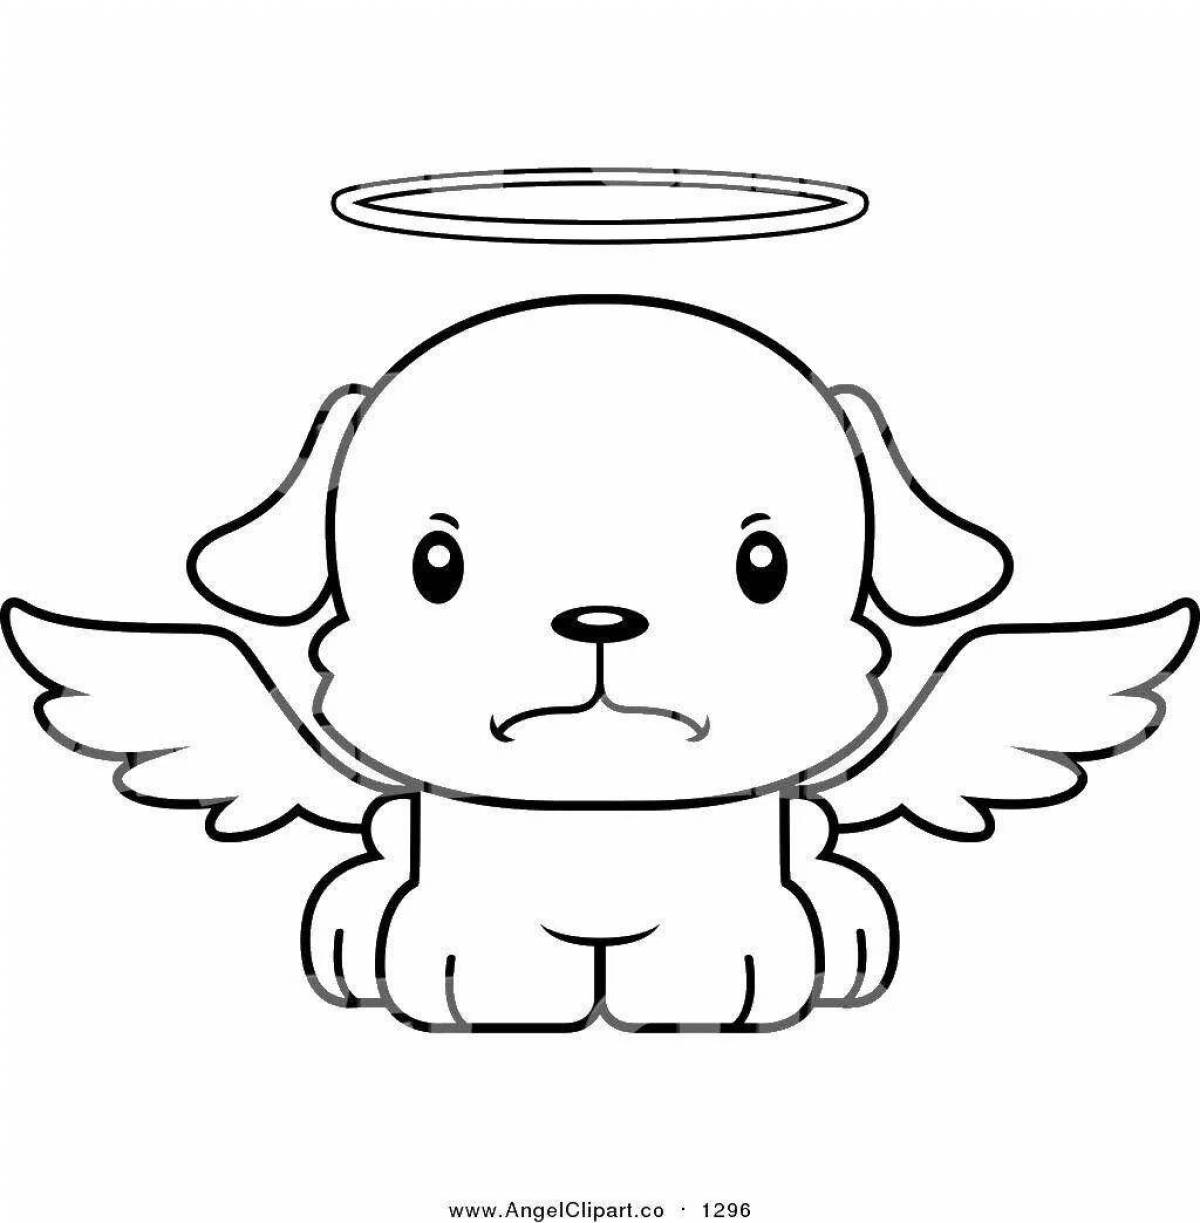 Glowing angel cat coloring page